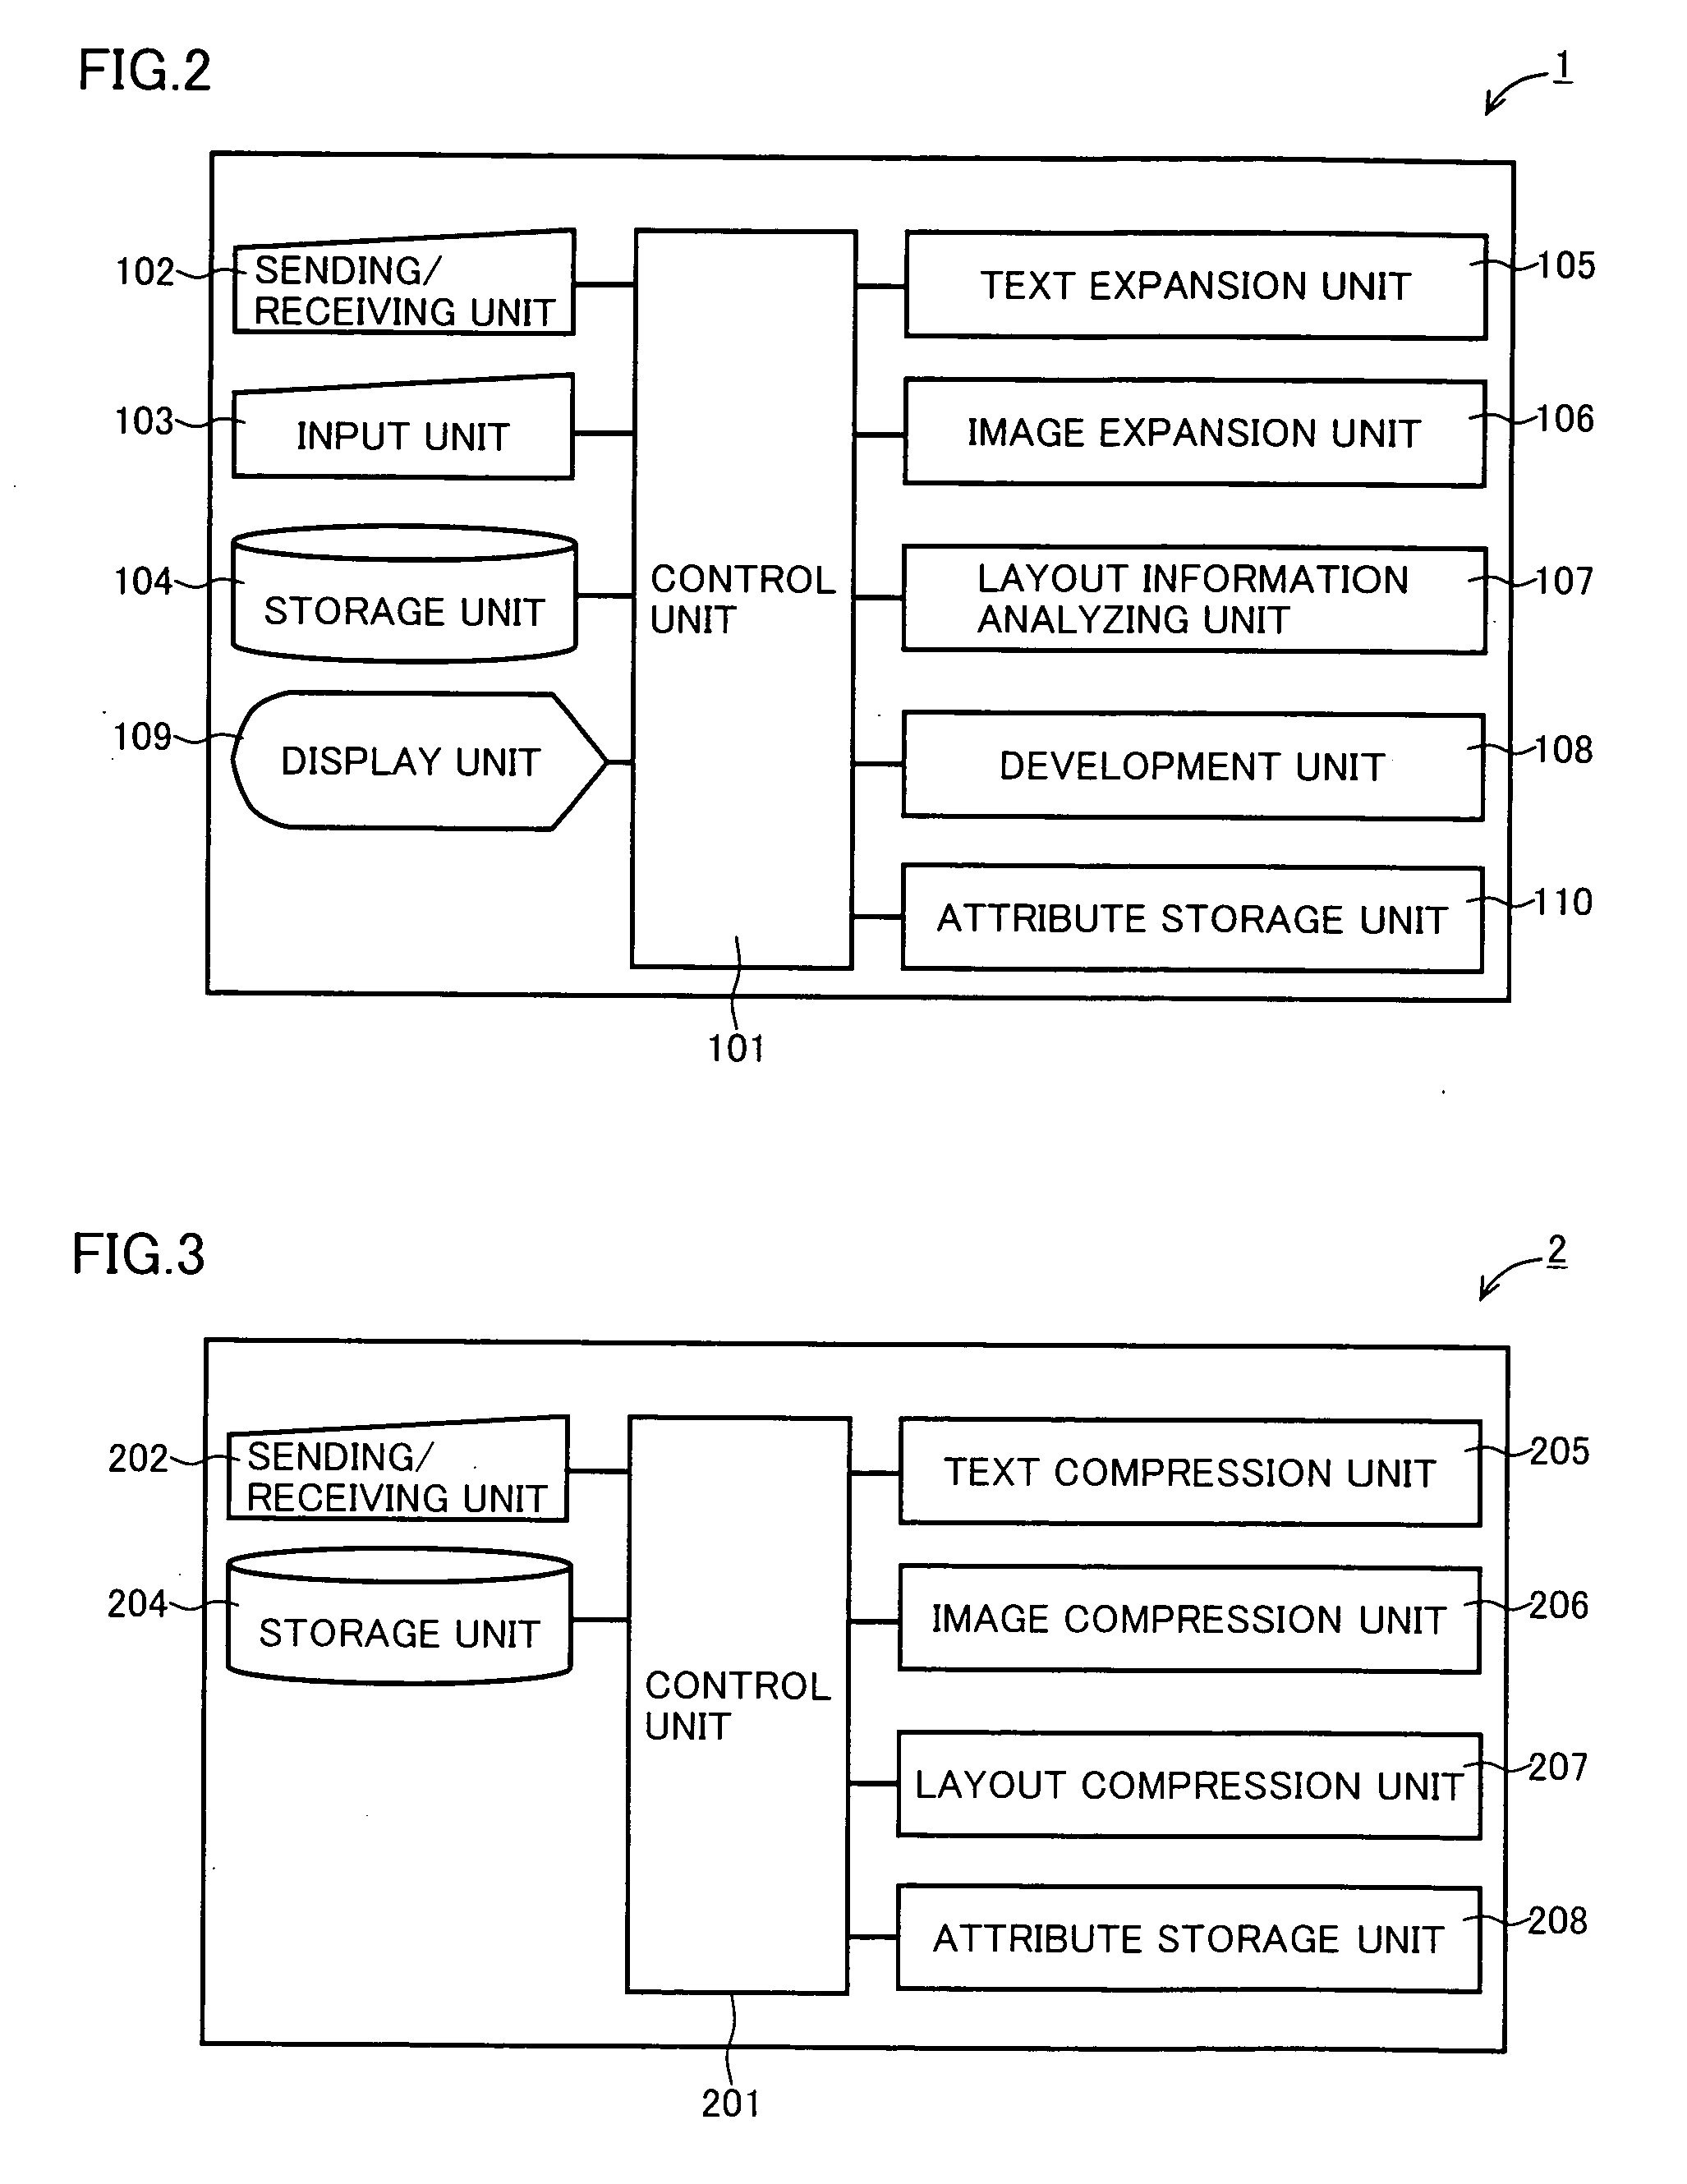 Document data output device capable of appropriately outputting document data containing a text and layout information